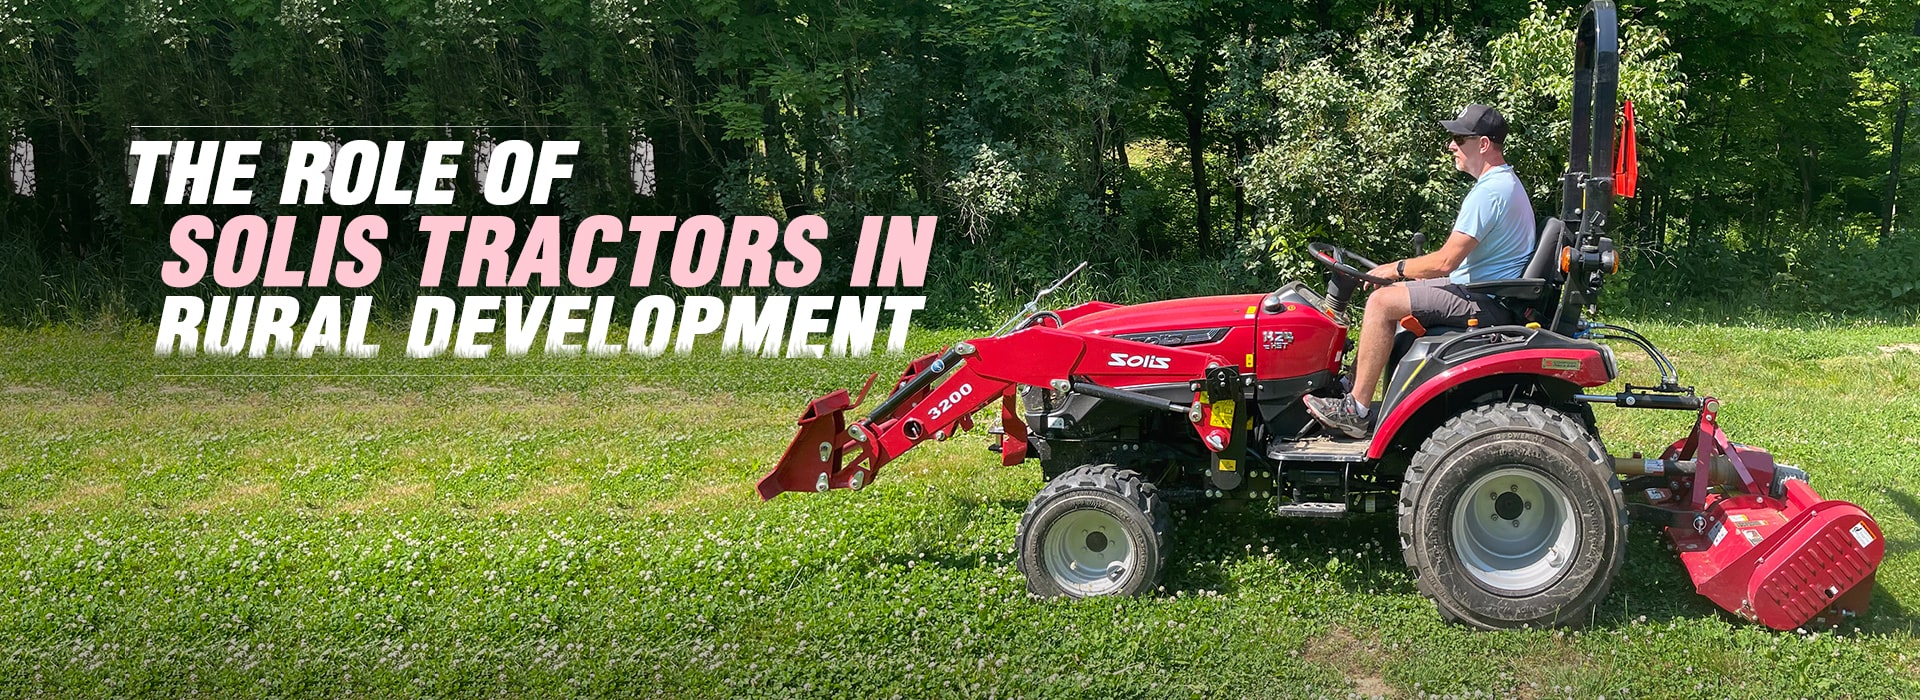 Empowering Small-Scale Farmers: The Role of Solis Tractors in Rural Development